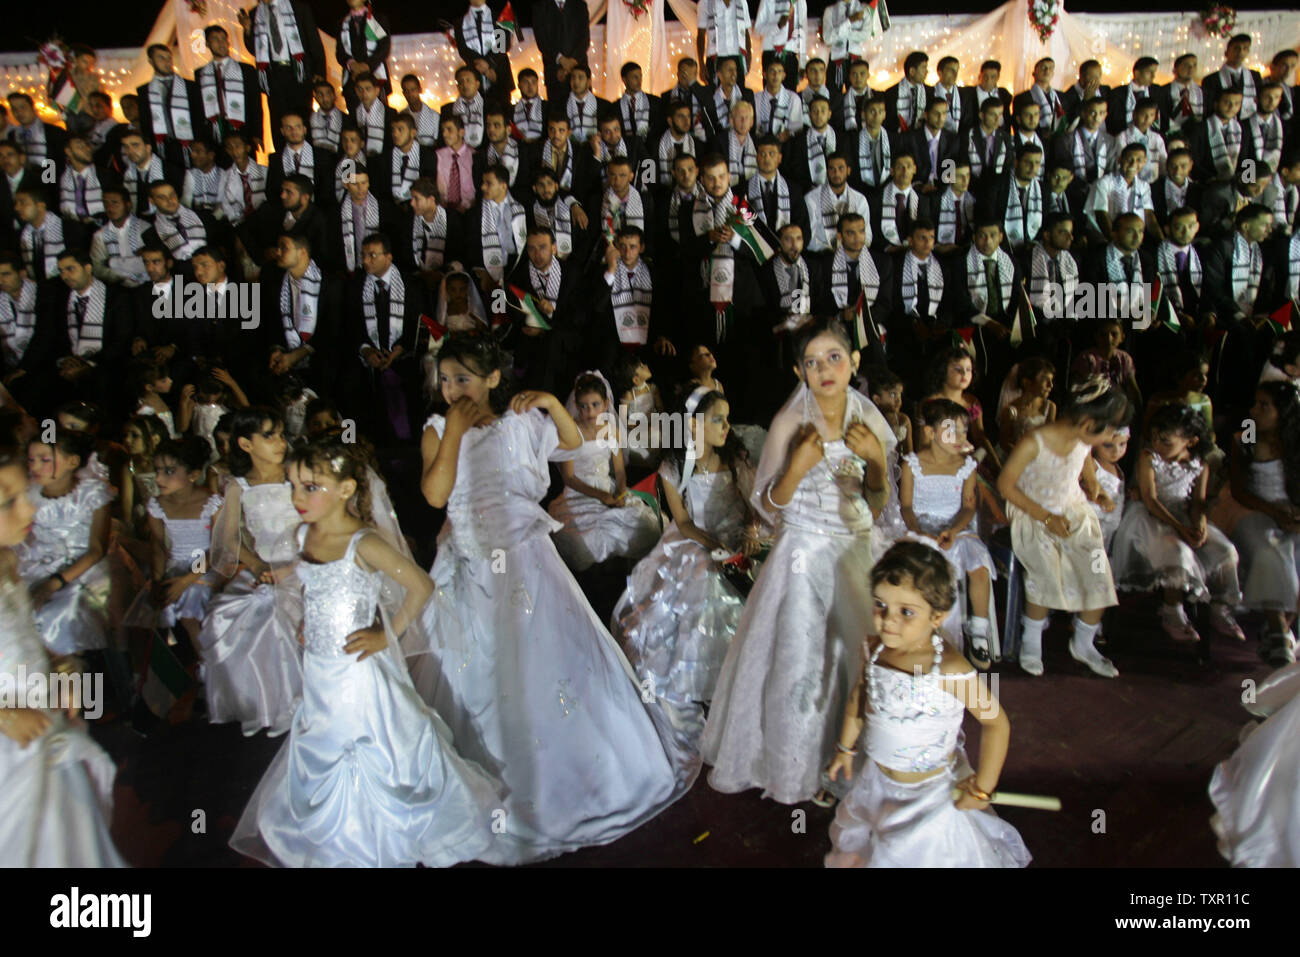 Palestinian girls, dressed as bridesmaids, during a mass wedding in Jabalya in the northern Gaza Strip July 30, 2009. Some 450 couples were married in Jabalya in a group wedding organized by the Islamic Society, a group affiliated to Hamas. The newly wedded brides held a separate closed-door celebration for their weddings.(UPI photo /Ismael Mohamad) Stock Photo